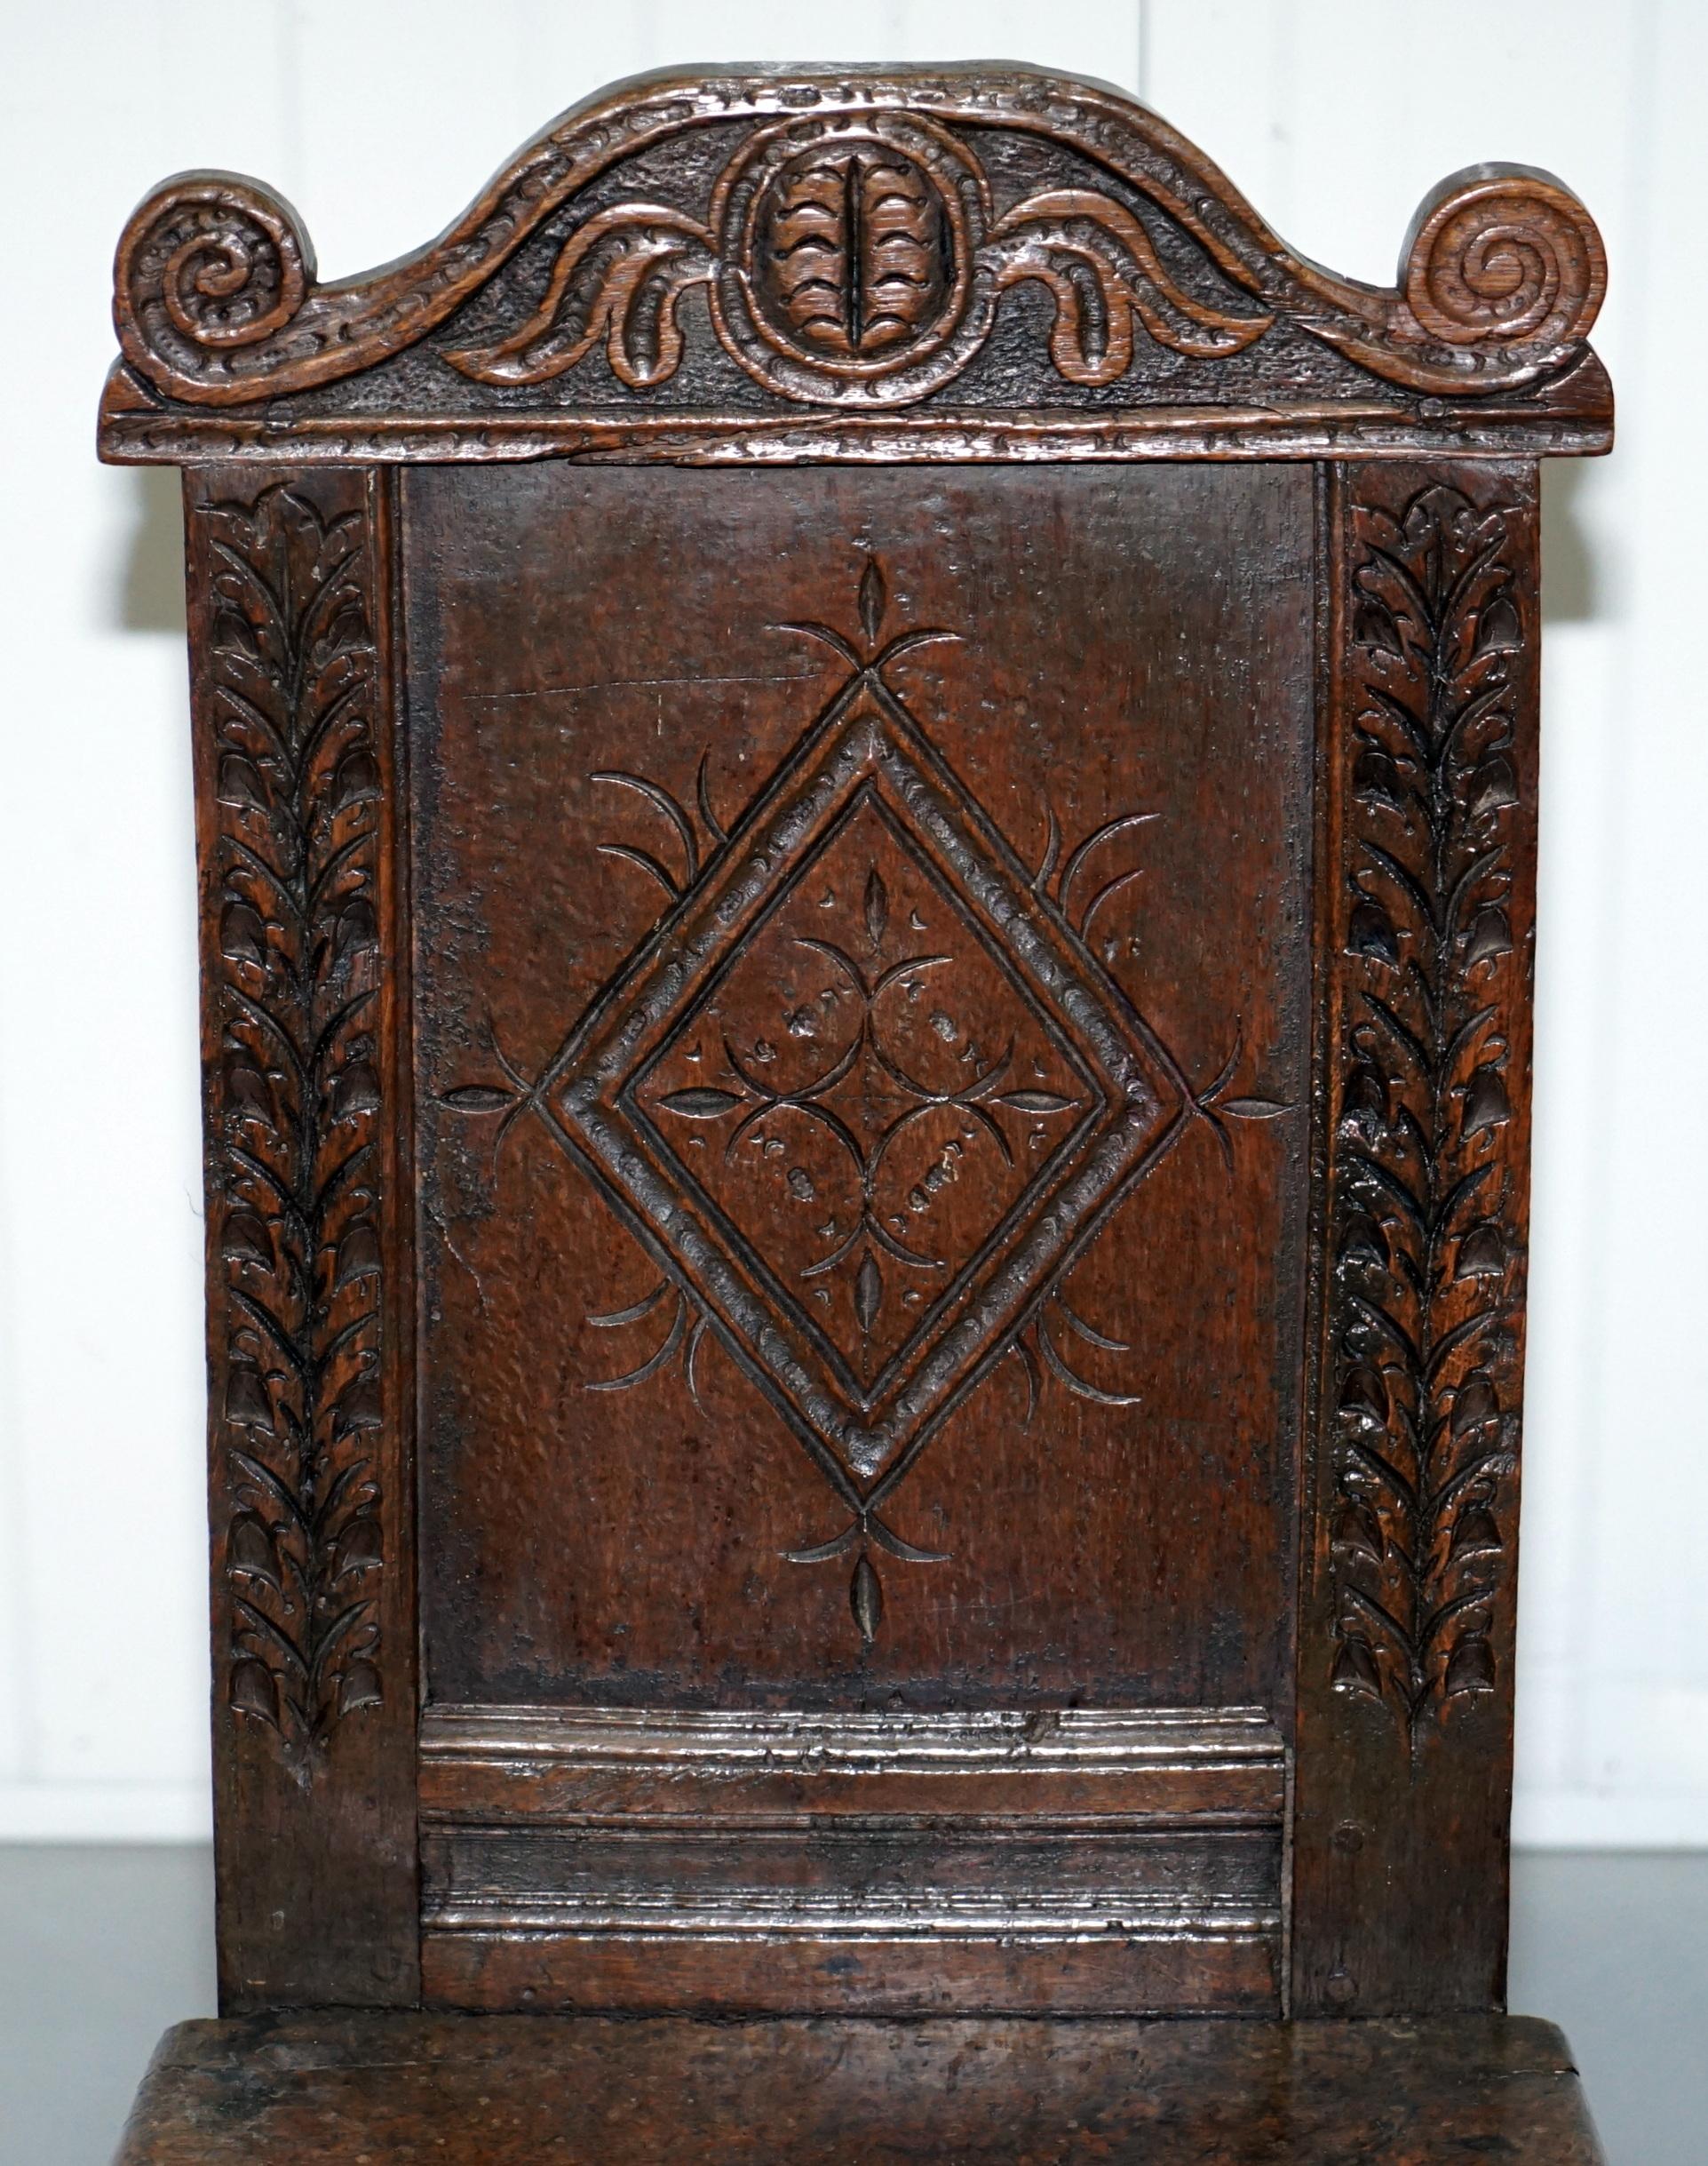 Jacobean Rare circa 1760 Fruit Wood Chair Nicely Carved Quite Small 18th Century Example For Sale